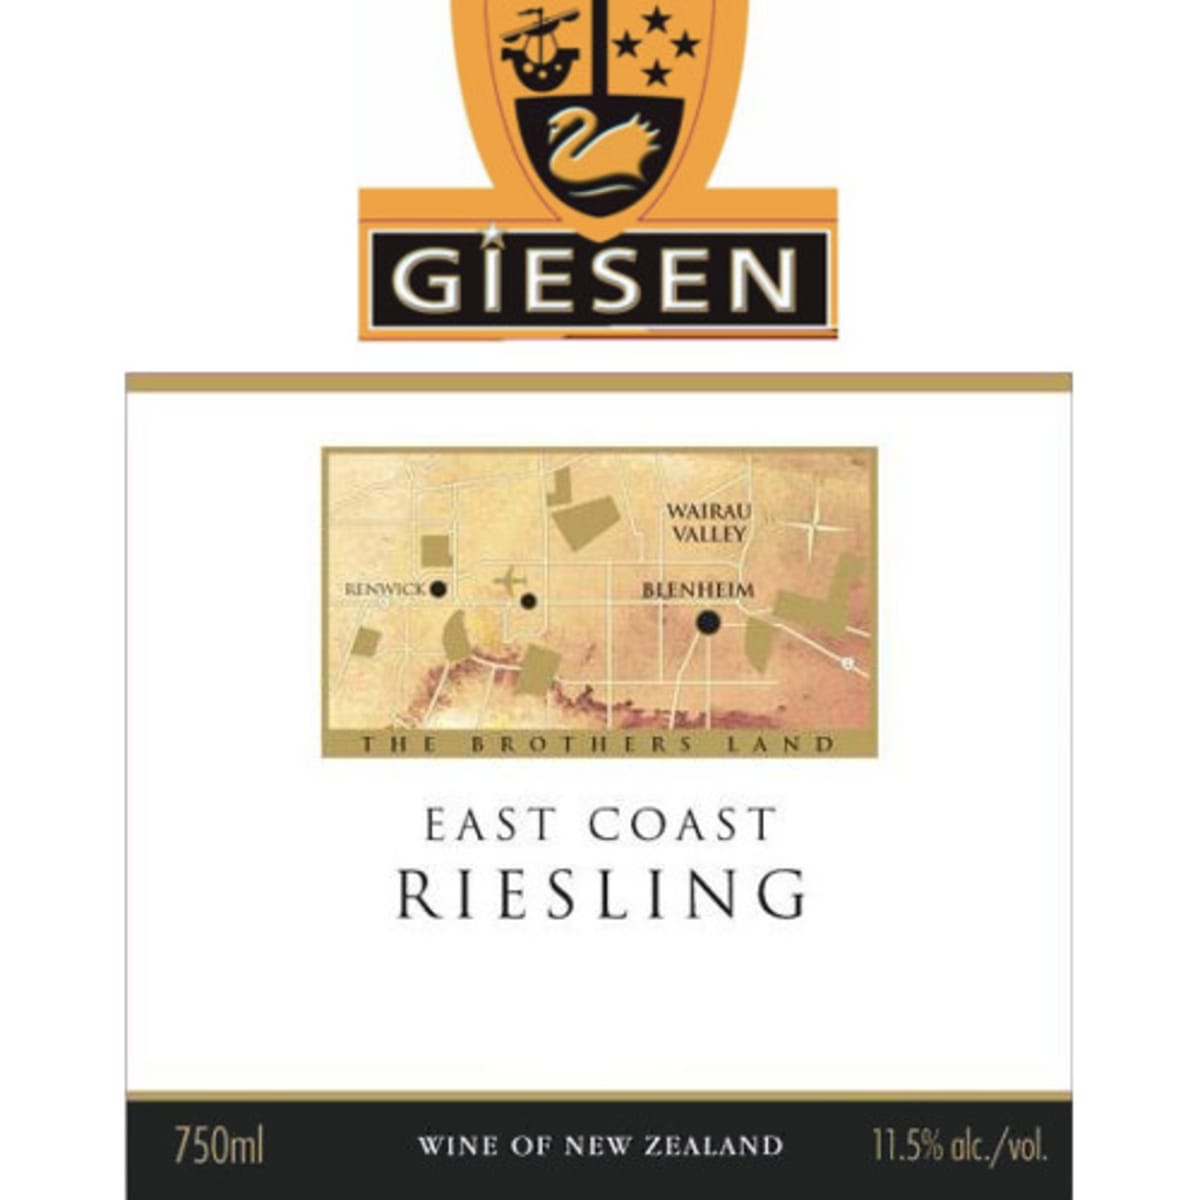 Giesen Riesling 2007 Front Label